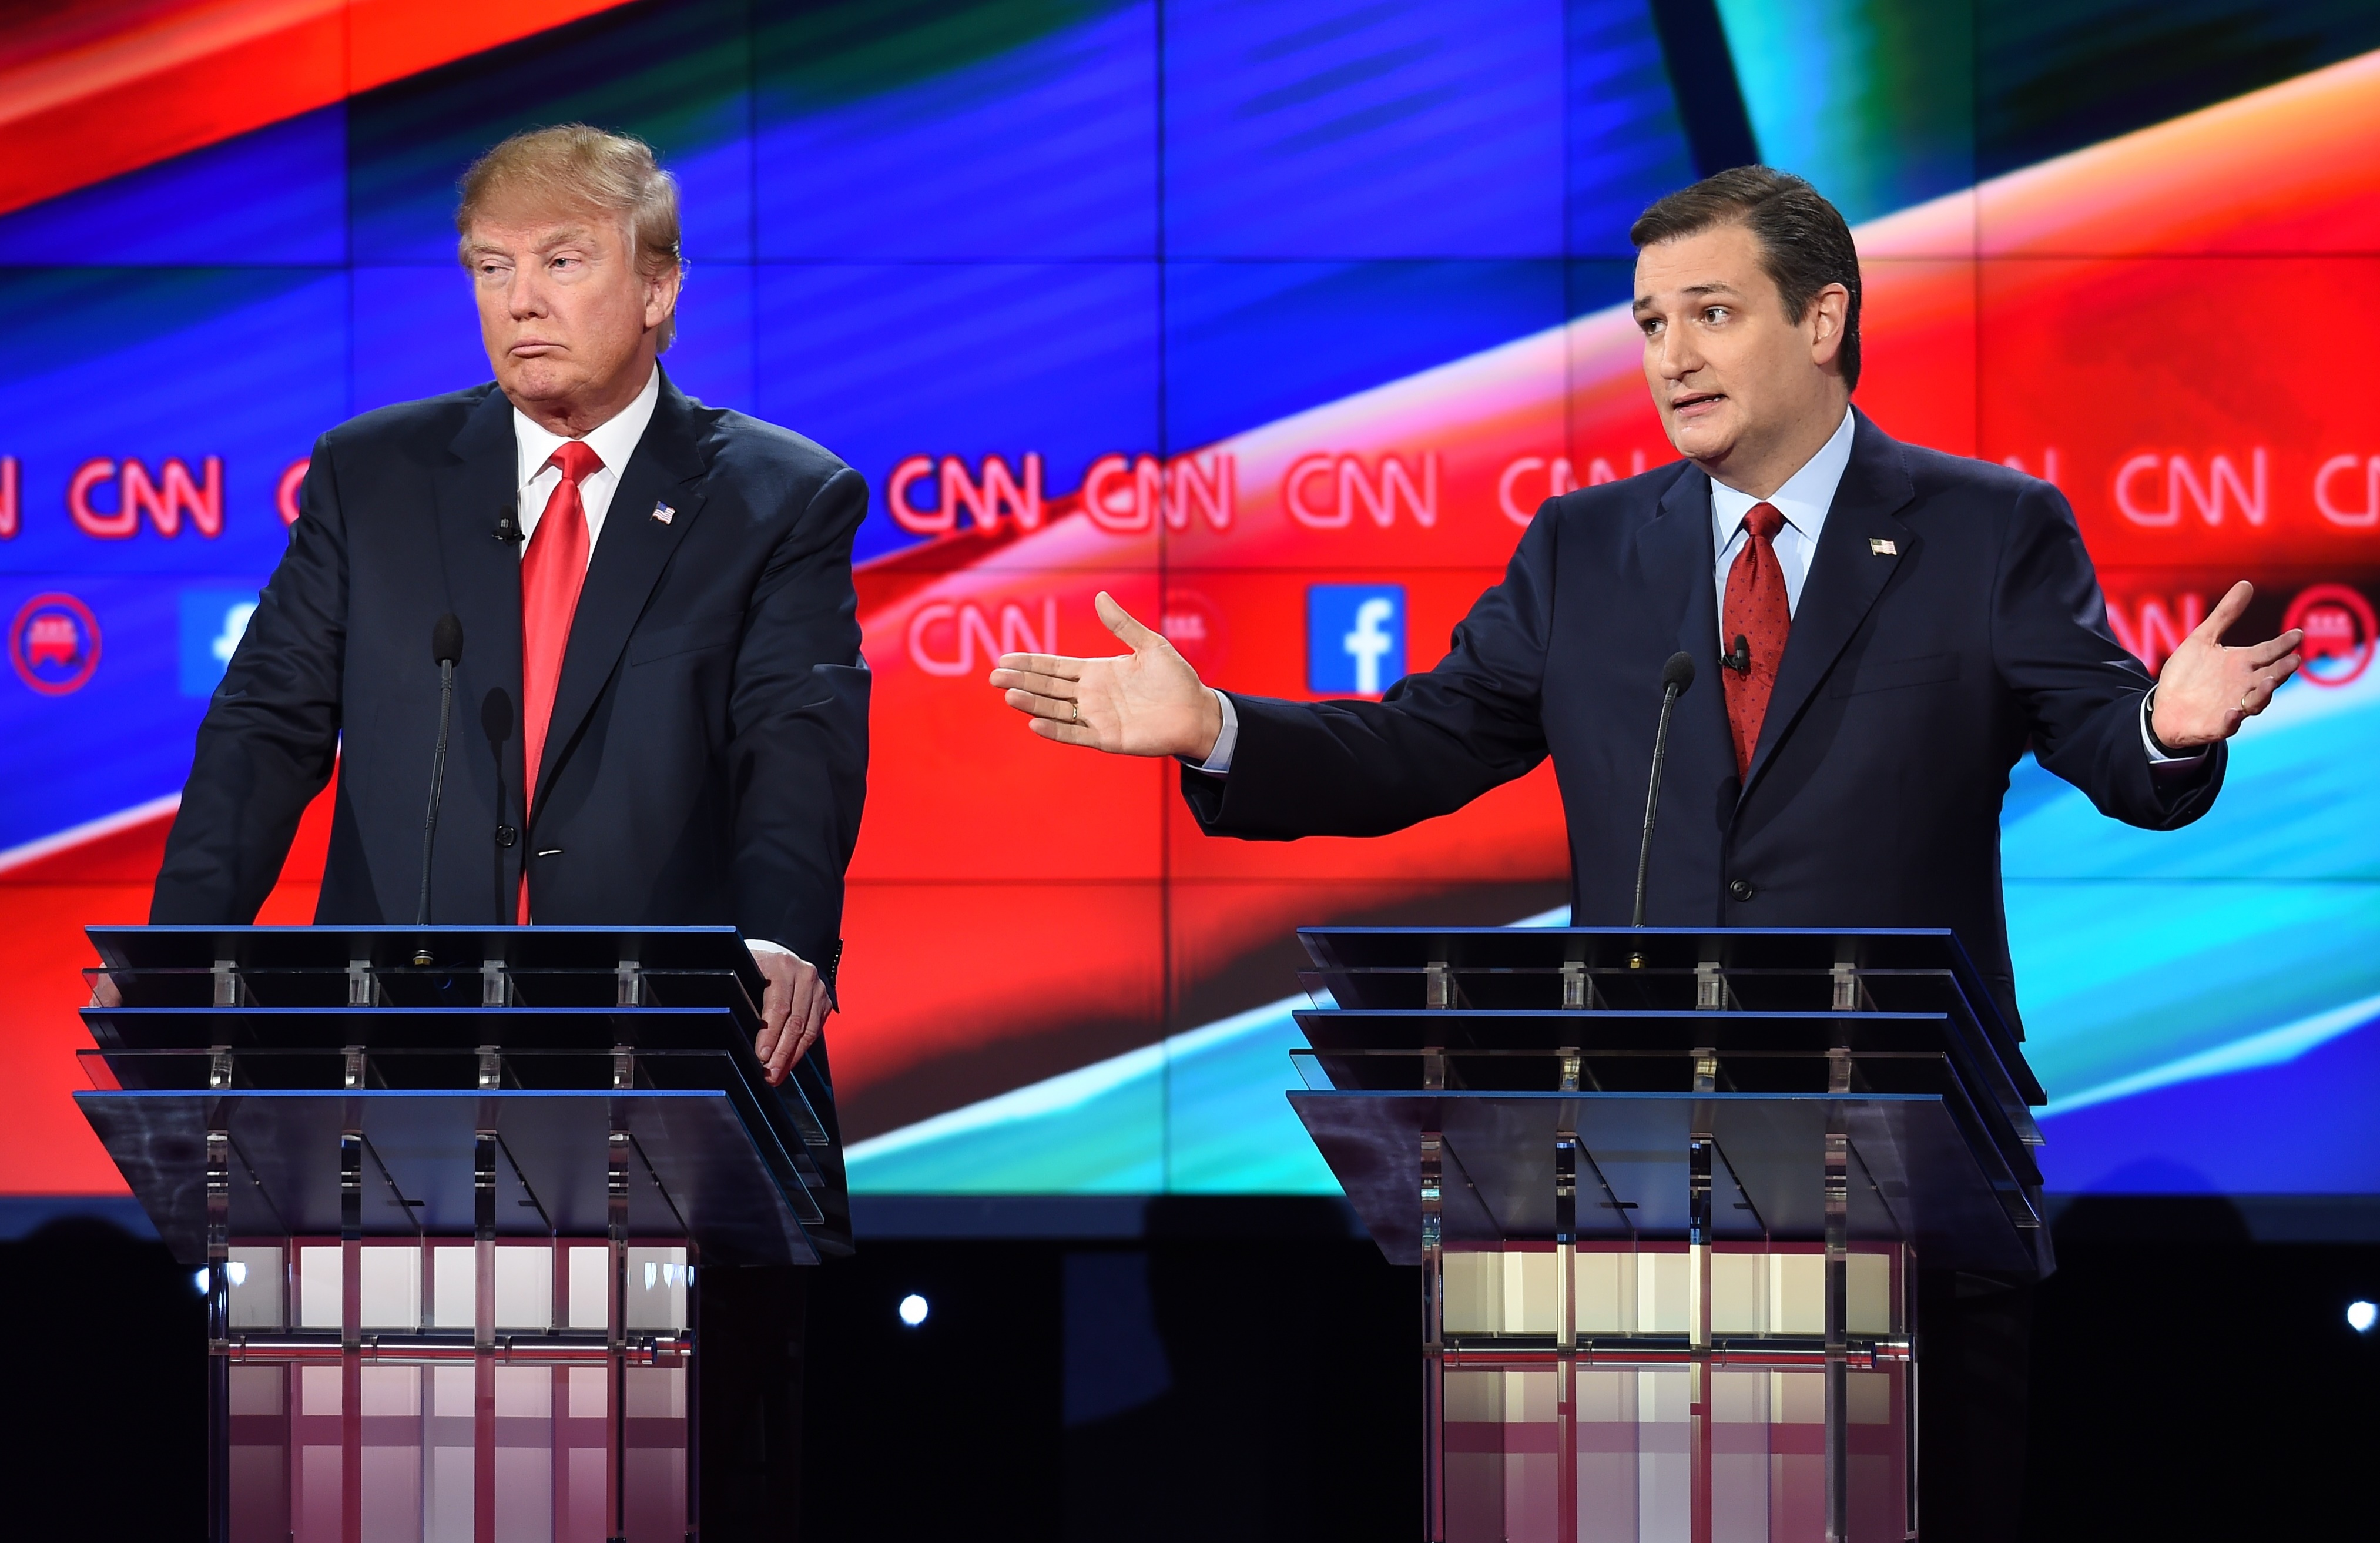 Donald Trump and Ted Cruz during the Republican Presidential Debate on Dec. 15, 2015 in Las Vegas, Nevada. (Robyn Beck—AFP/Getty Images)